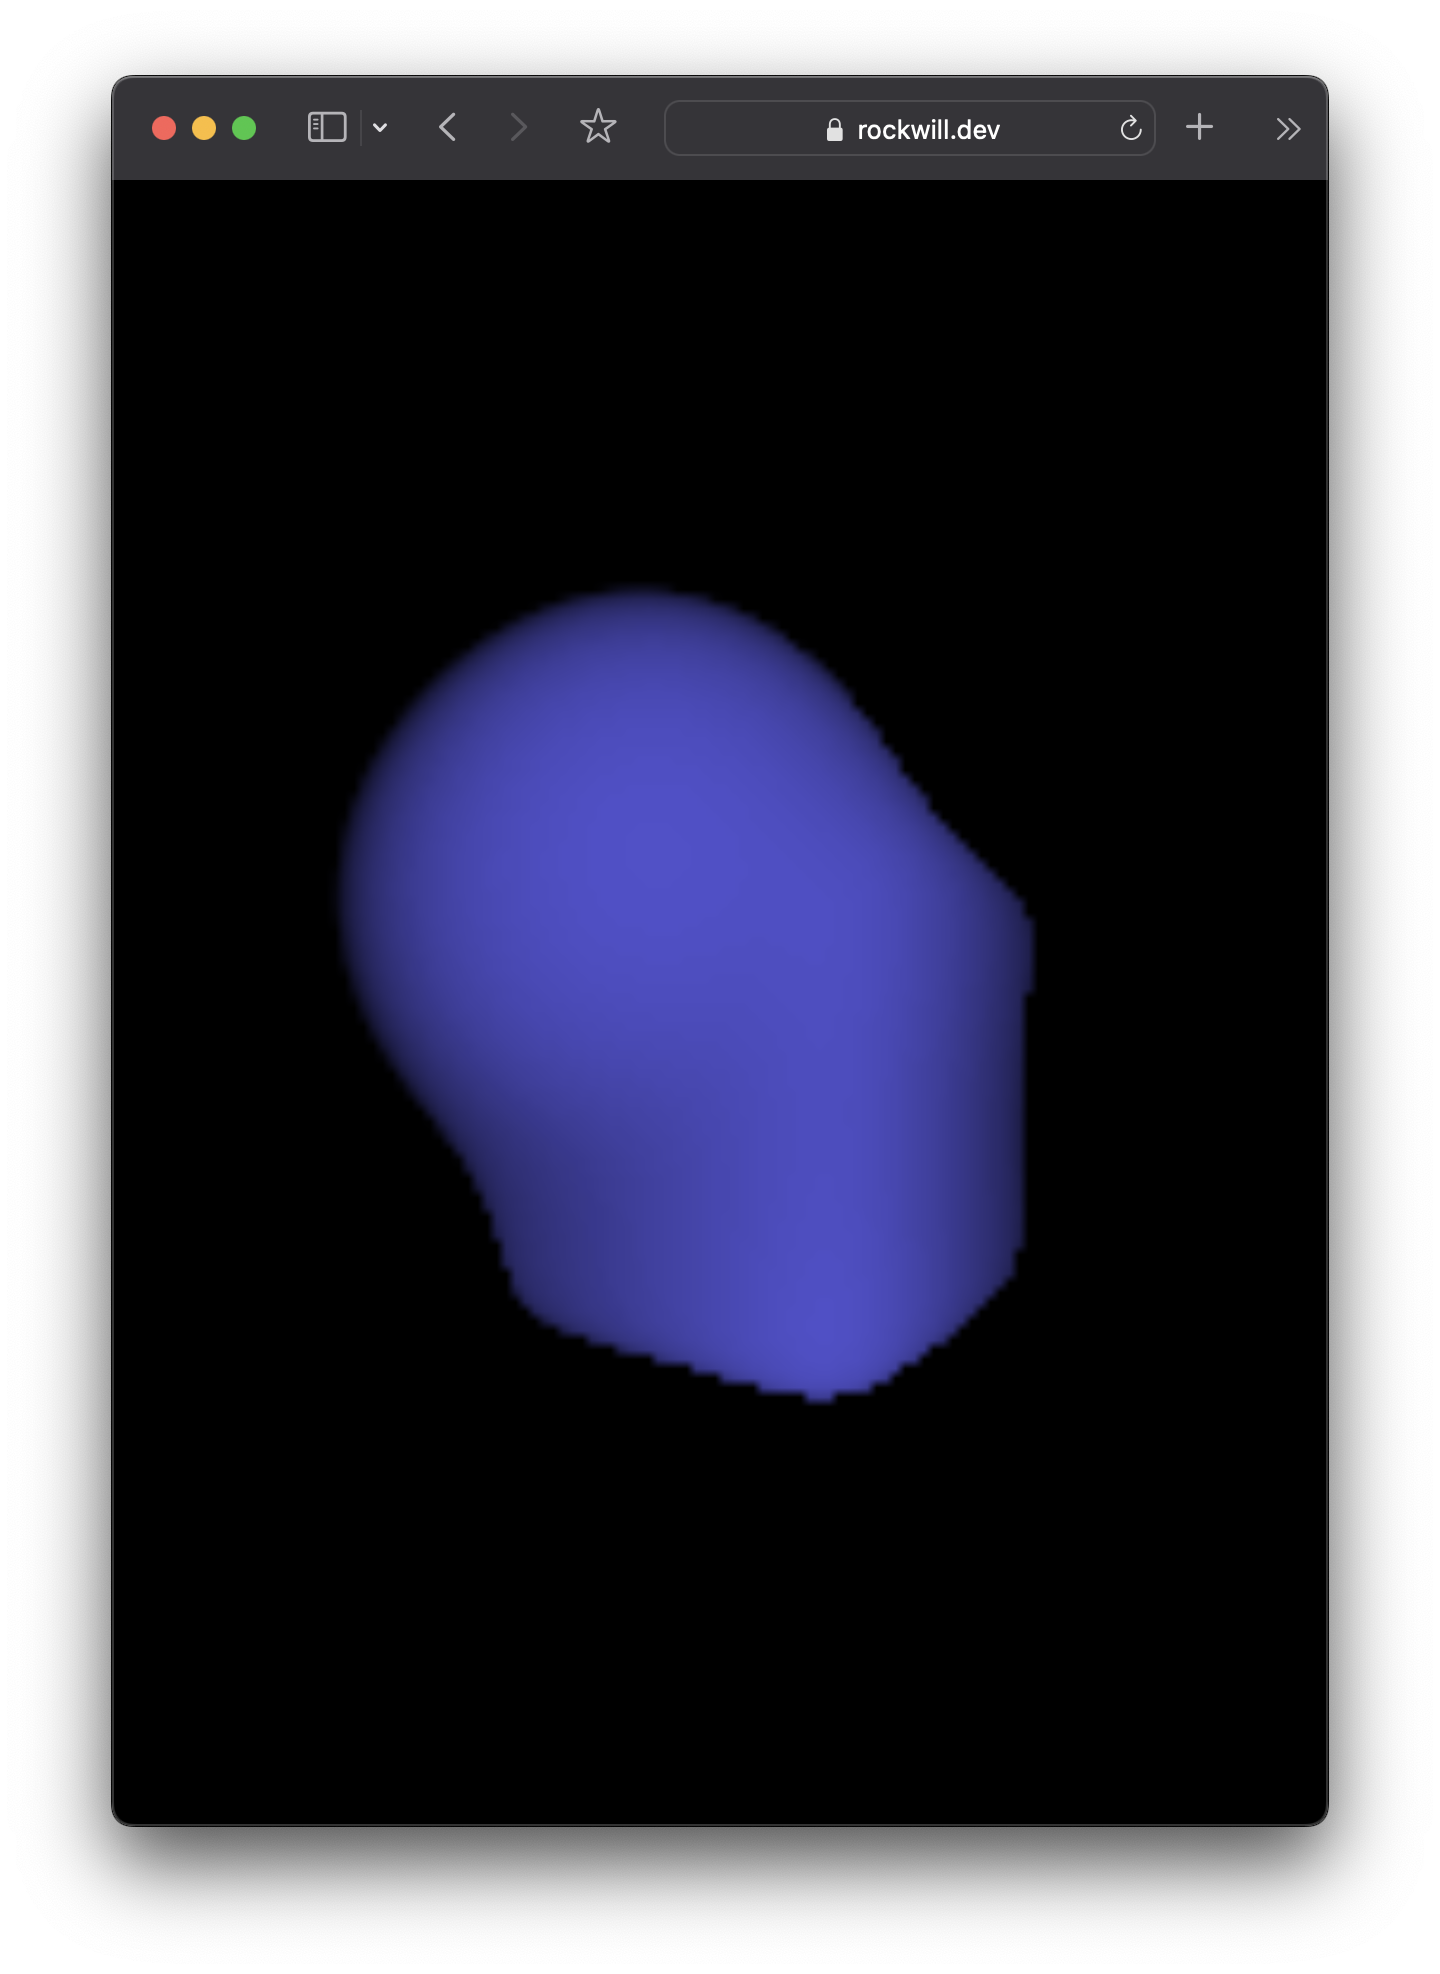 Screenshot of a metaballs implementation in the browser.